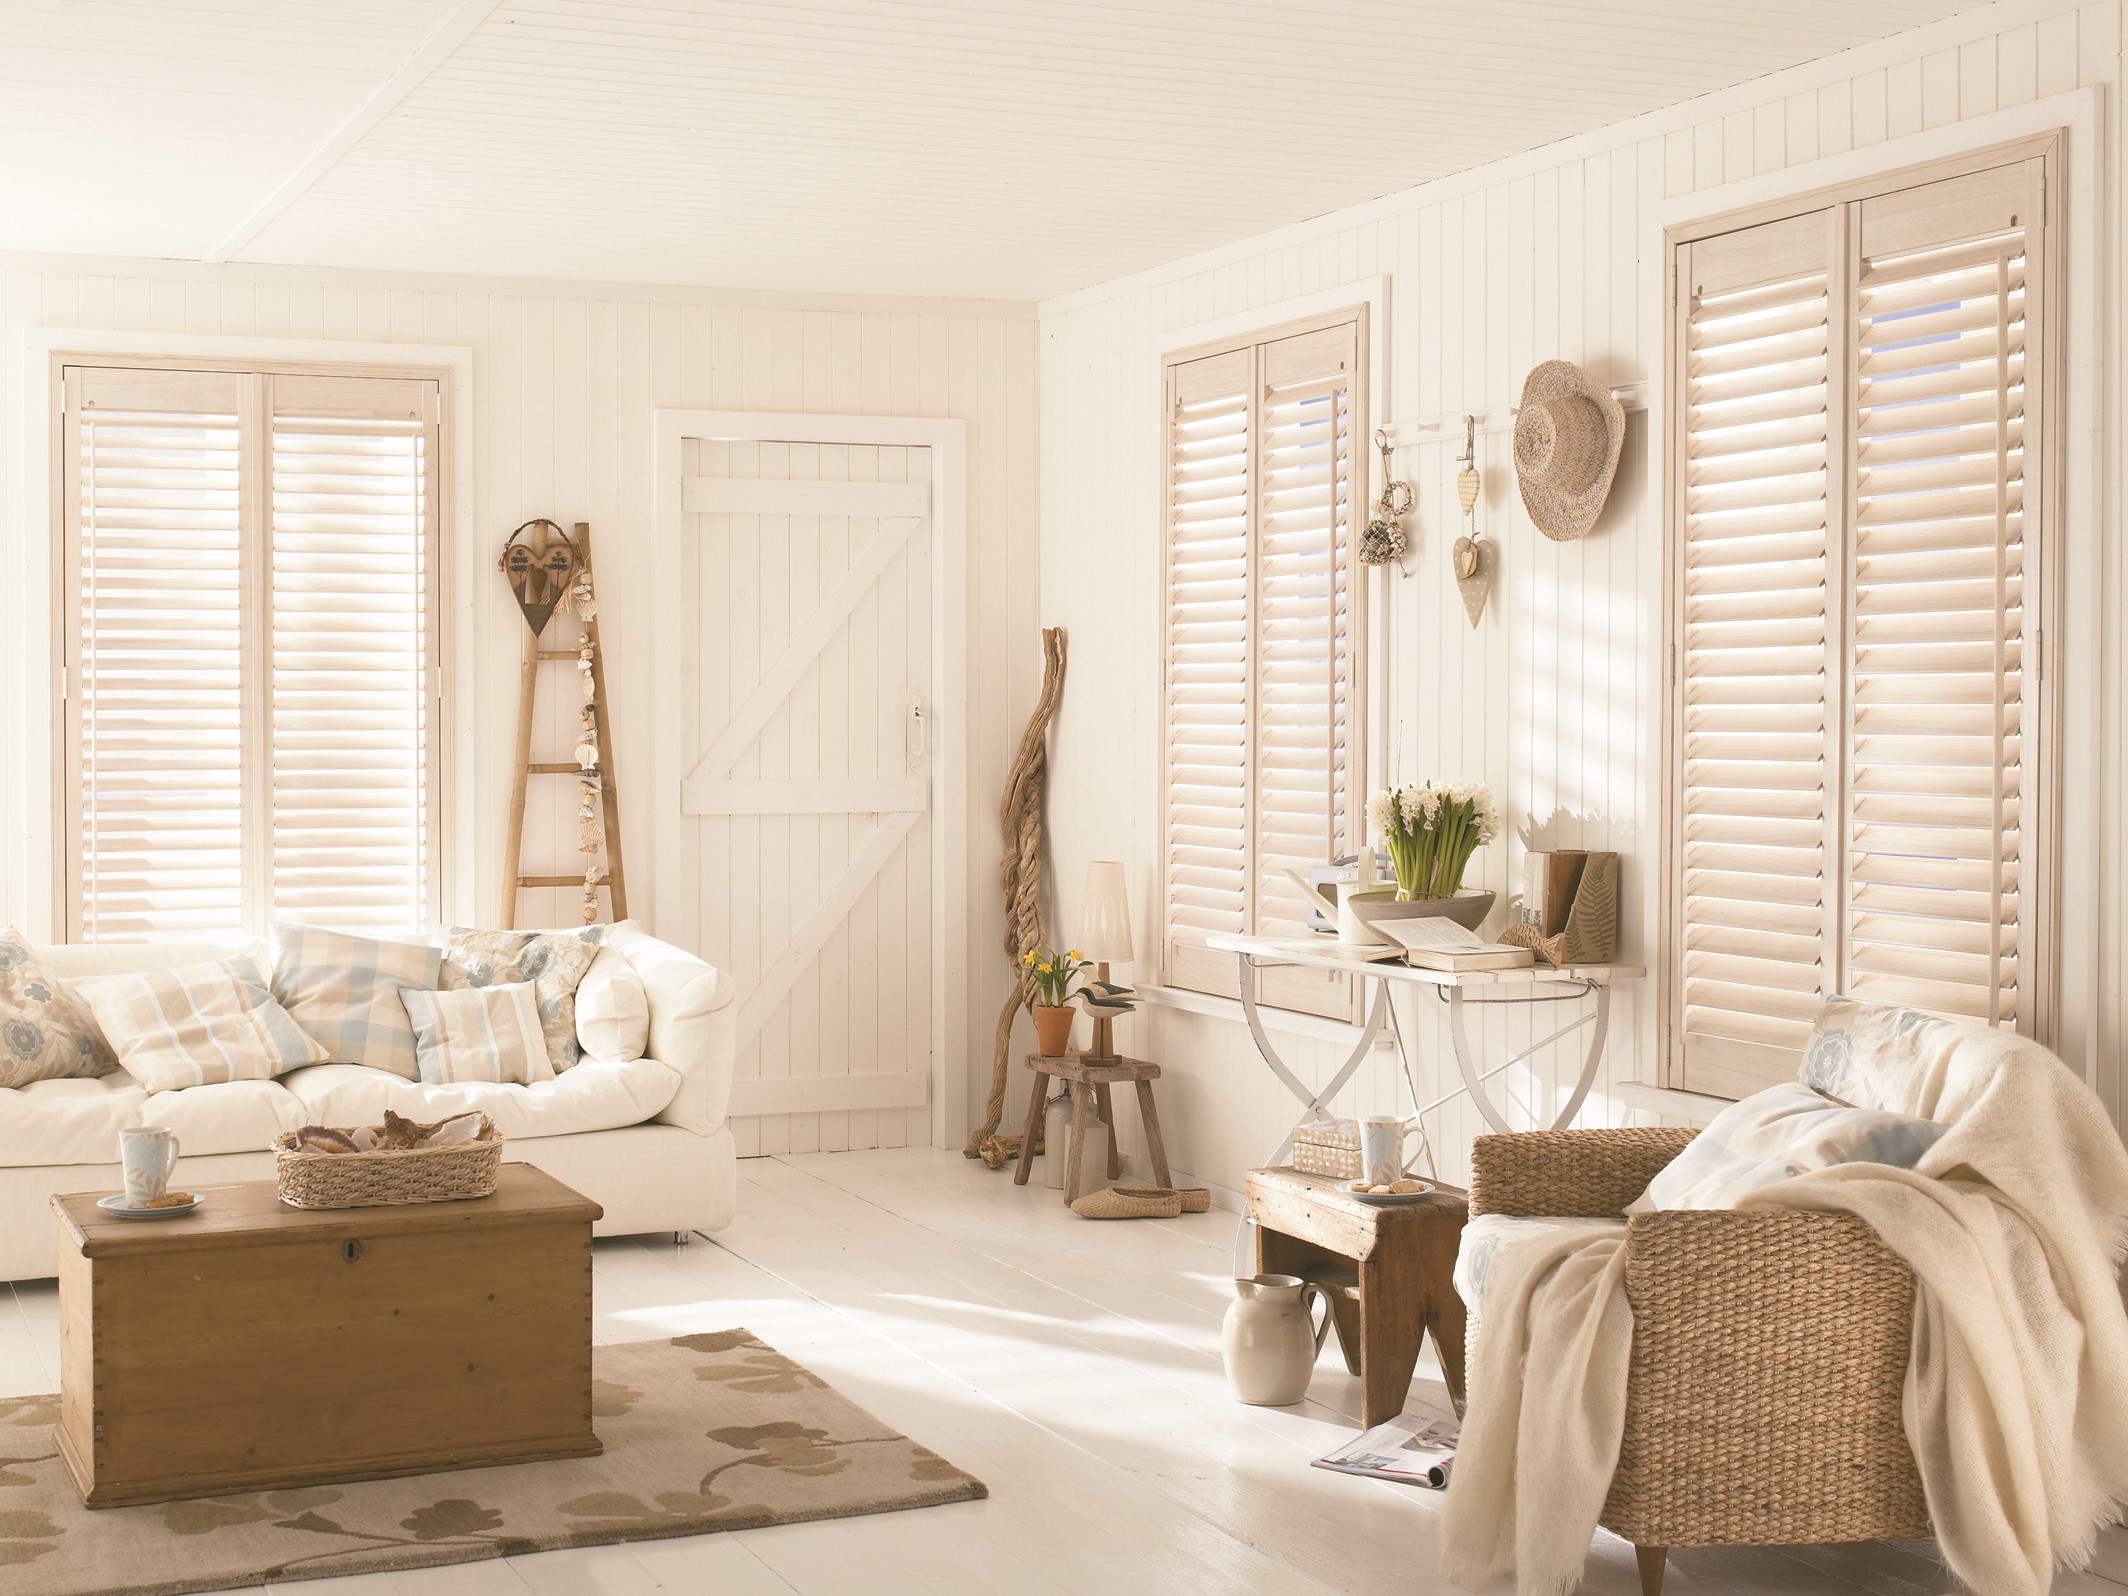 Classic Shutters in a traditional farmhouse interior